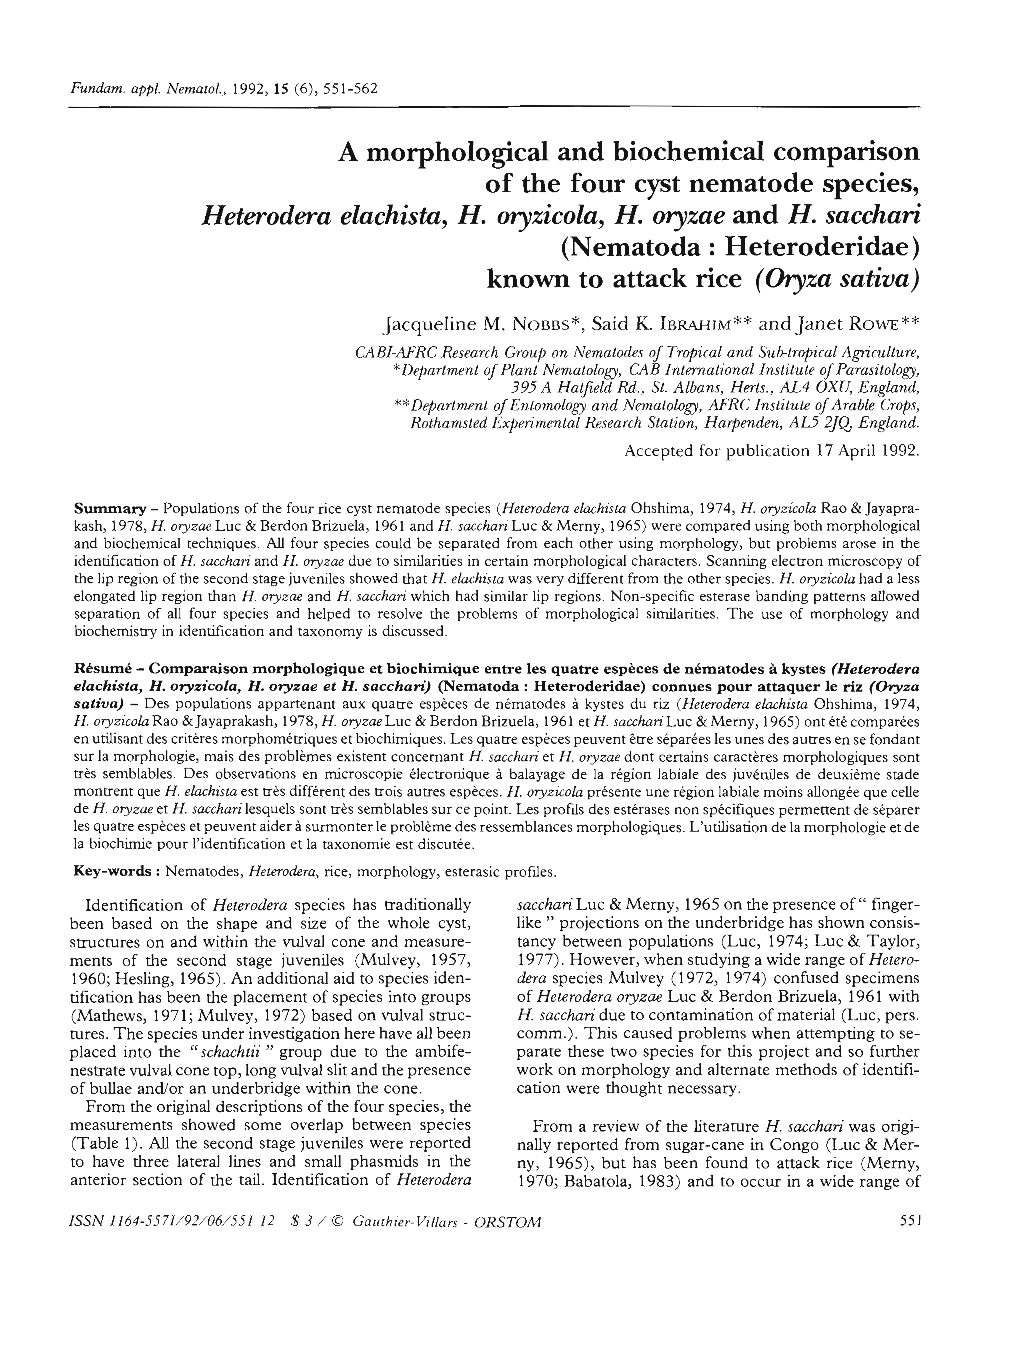 A Morphological and Biochemical Comparison of the Four Cyst Nematode Species, Heterodera Elachista, H